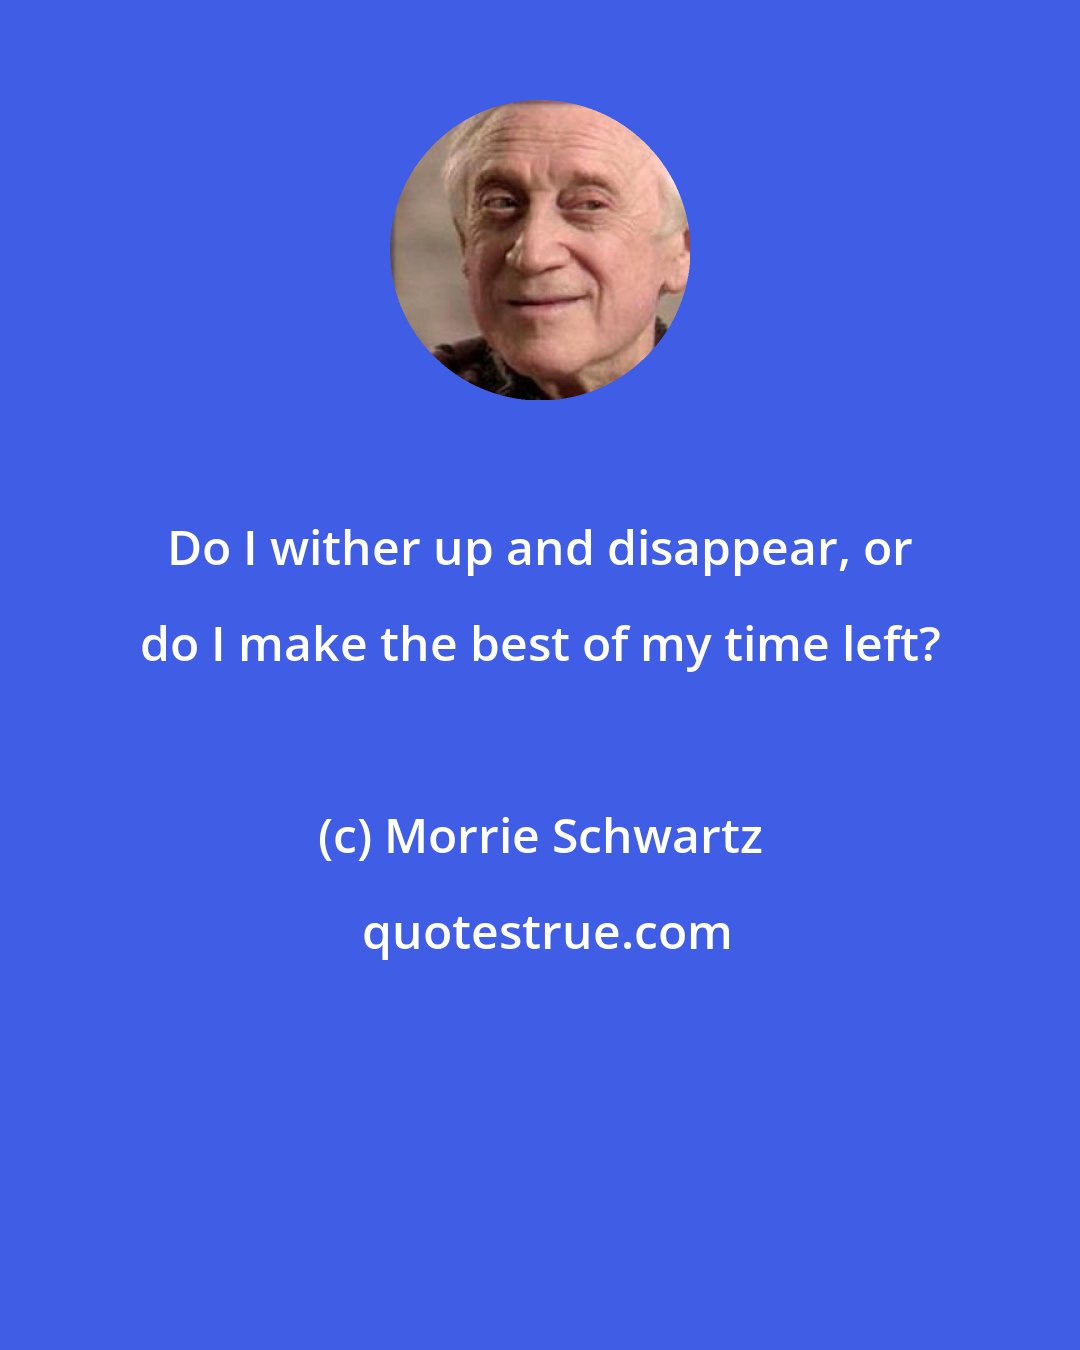 Morrie Schwartz: Do I wither up and disappear, or do I make the best of my time left?